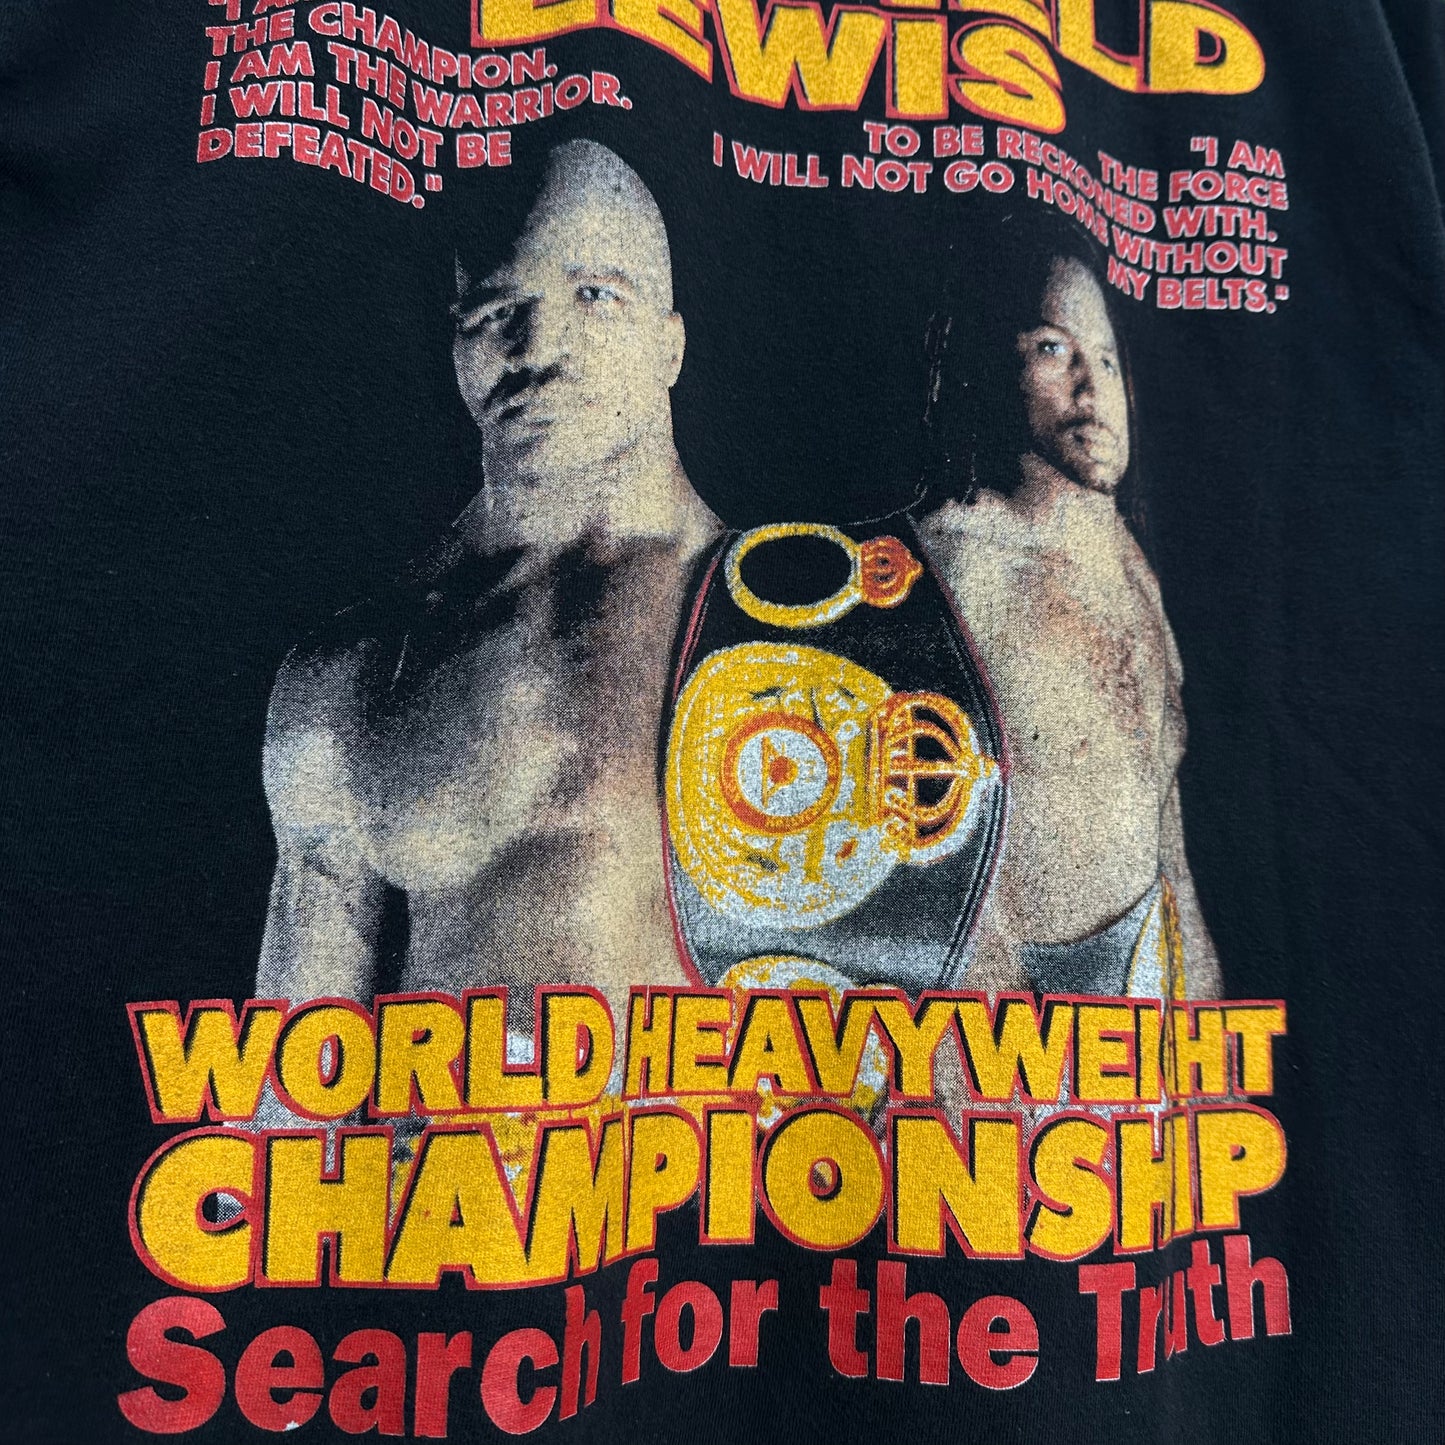 90's Holyfield vs Lewis Unfinished Business Shirt - L